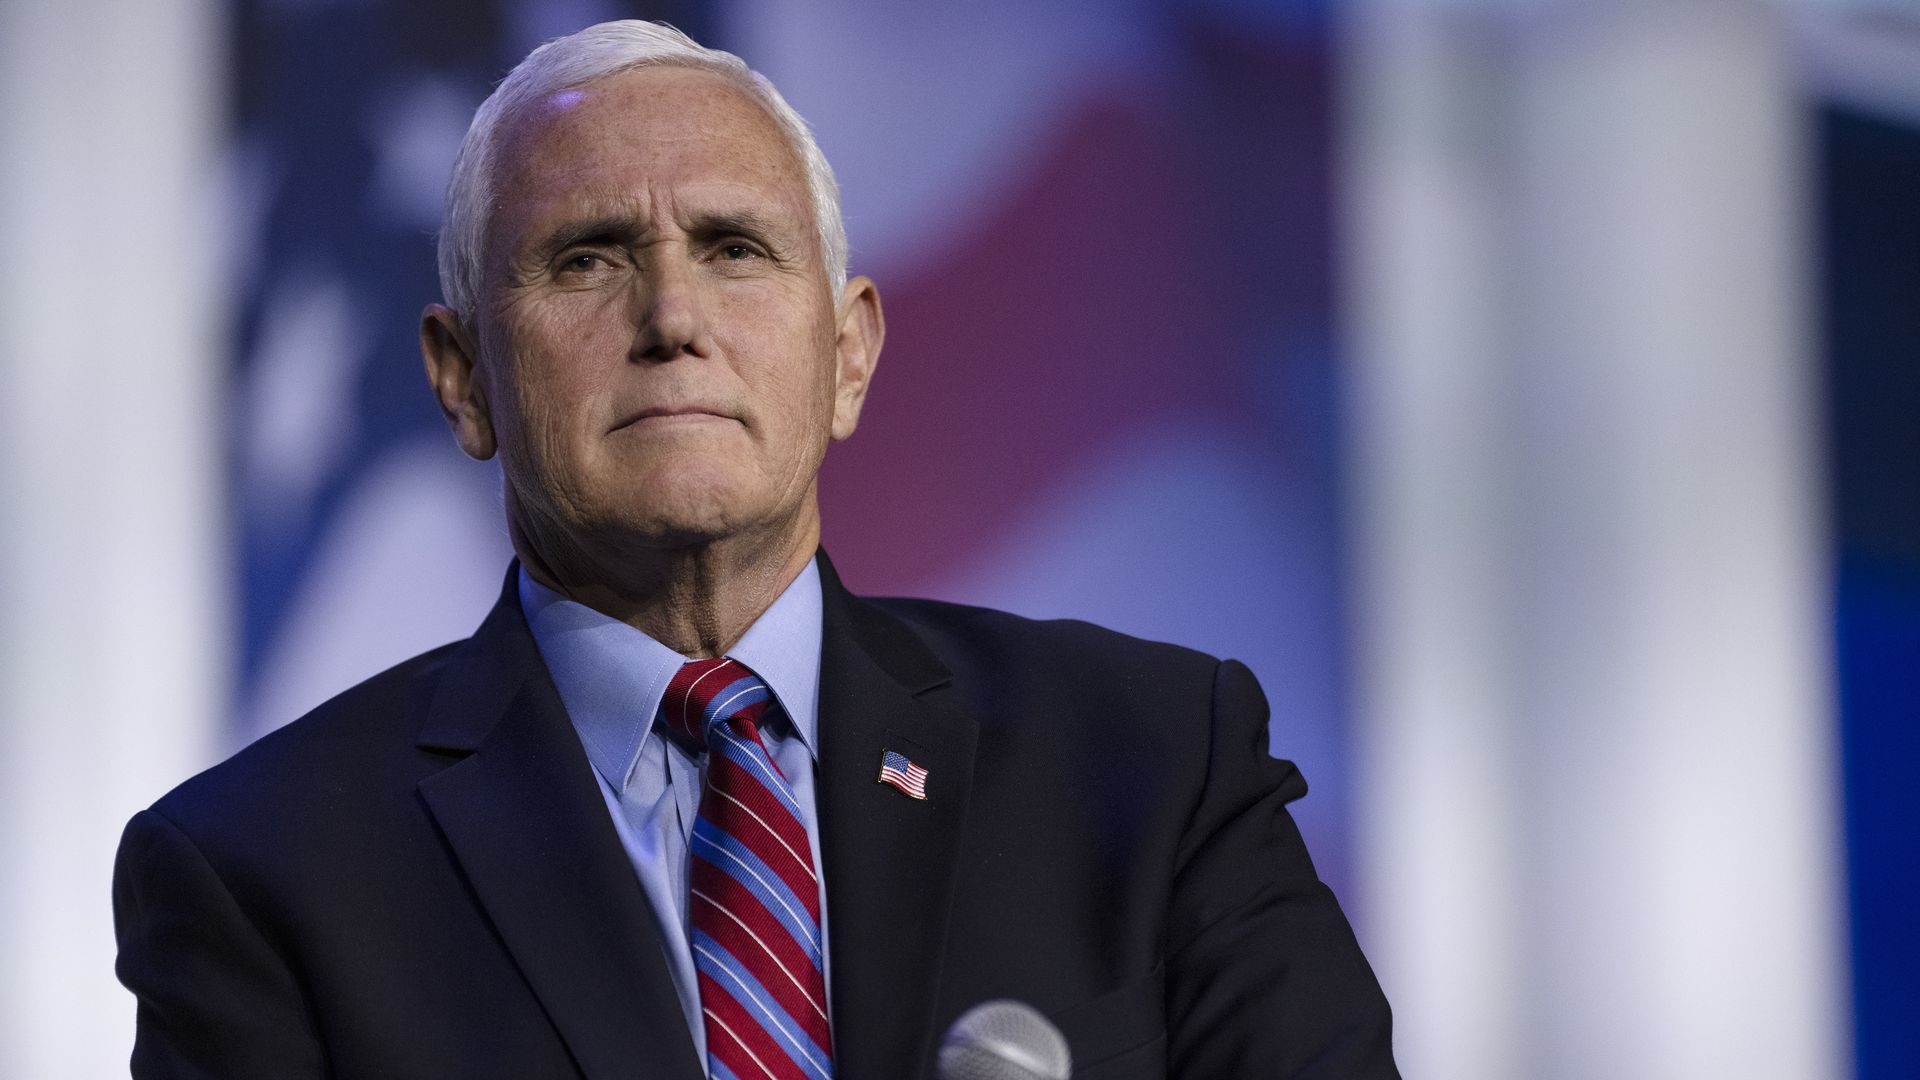 Former Vice President Mike Pence is seen at a public event.